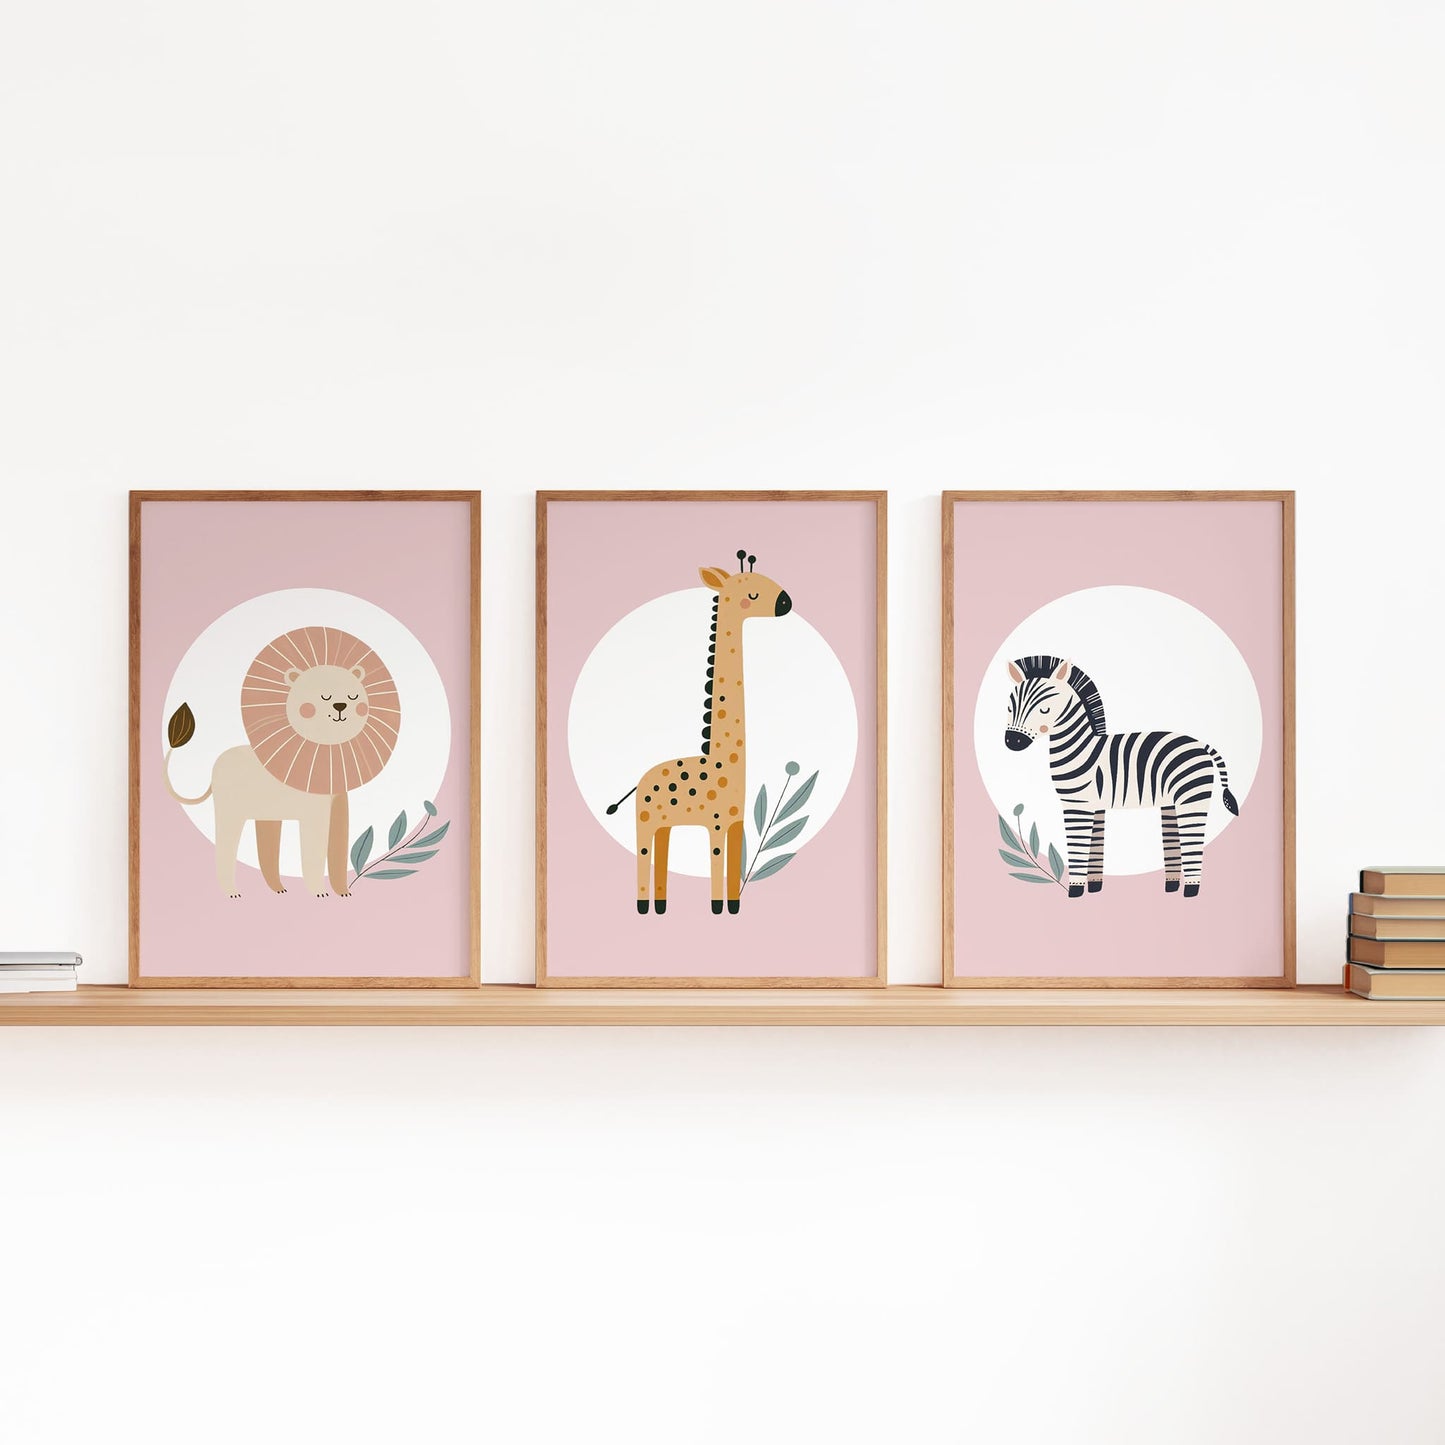 Set of three A4 prints featuring minimalist illustrations in muted tones. Each print depicts a different animal: a lion, a zebra, and a giraffe. The background is dusty pink with a white circle on which the animal is overlaid.